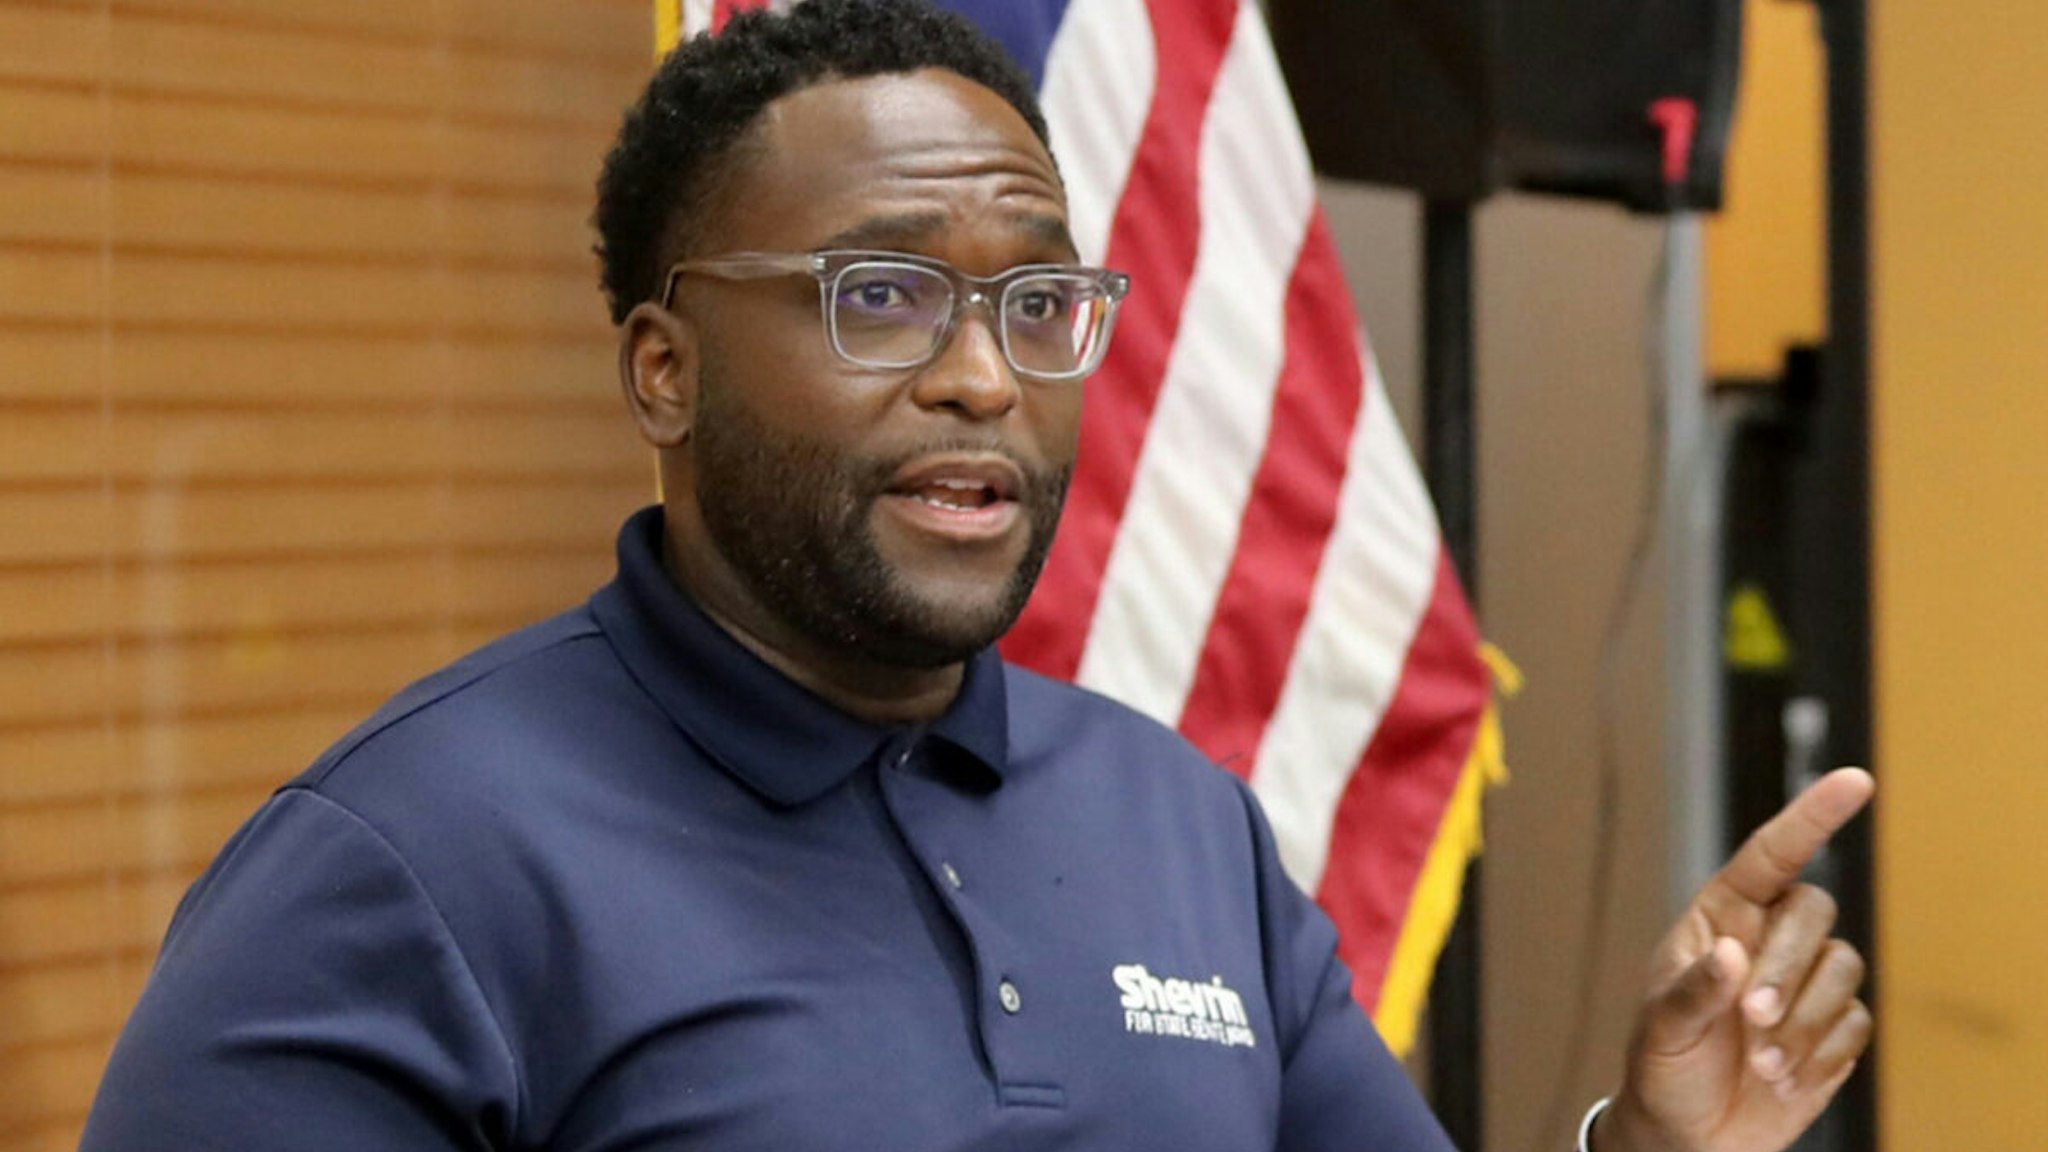 Florida state Sen. Shevrin Jones, along with Broward Supervisor of Elections Joe Scott and civil rights activists, holds a news conference on Friday, May 7, 2021, at the Broward County Supervisor of Elections Office in Lauderhill, Florida